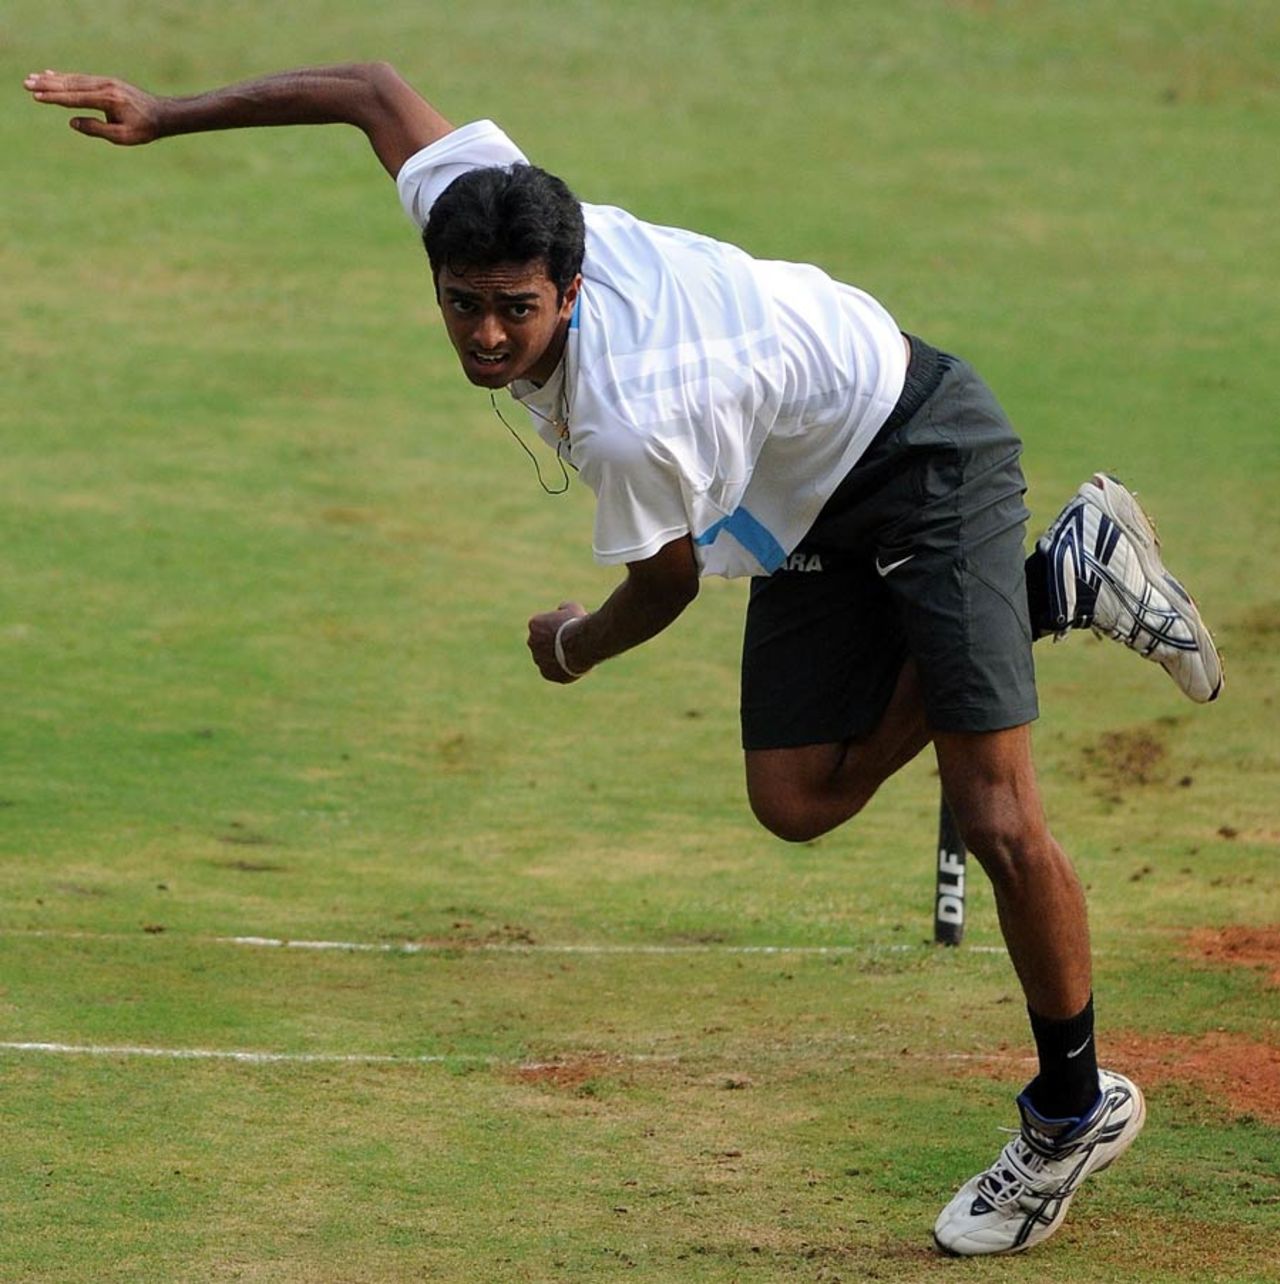 18-year-old Jaydev Unadkat at his first net session with the Indian team, Bangalore, October 7, 2010